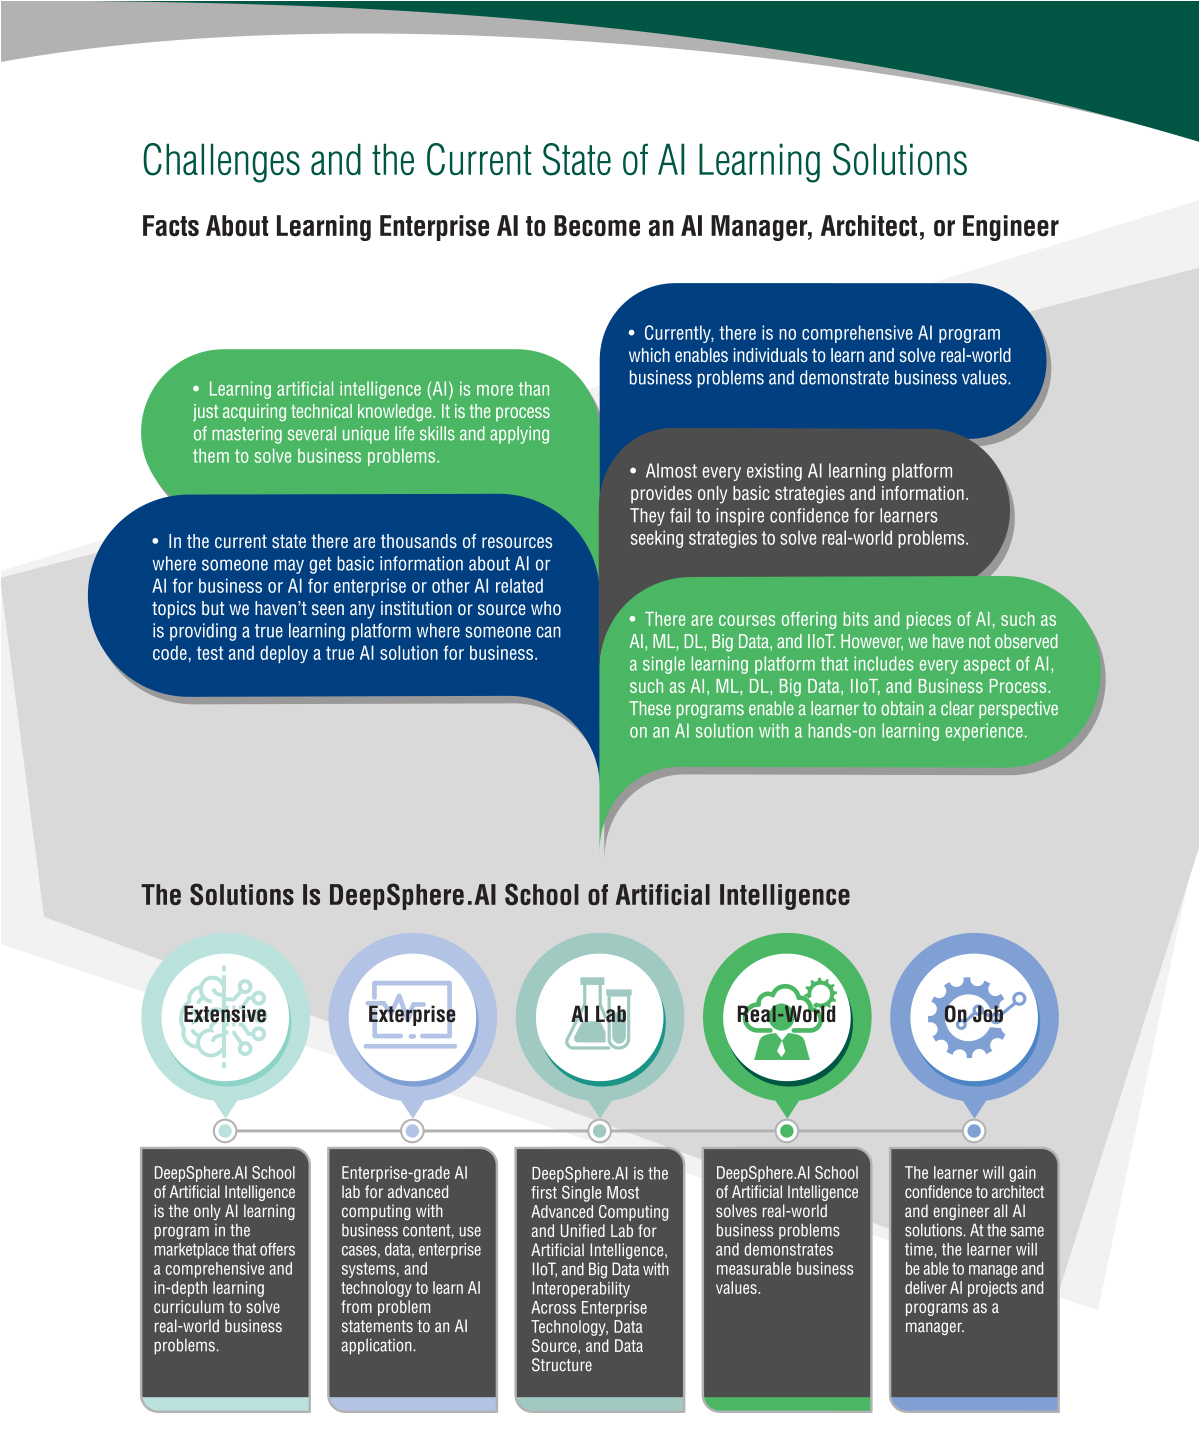 Challenges in Learning Artificial Intelligence for Enterprise